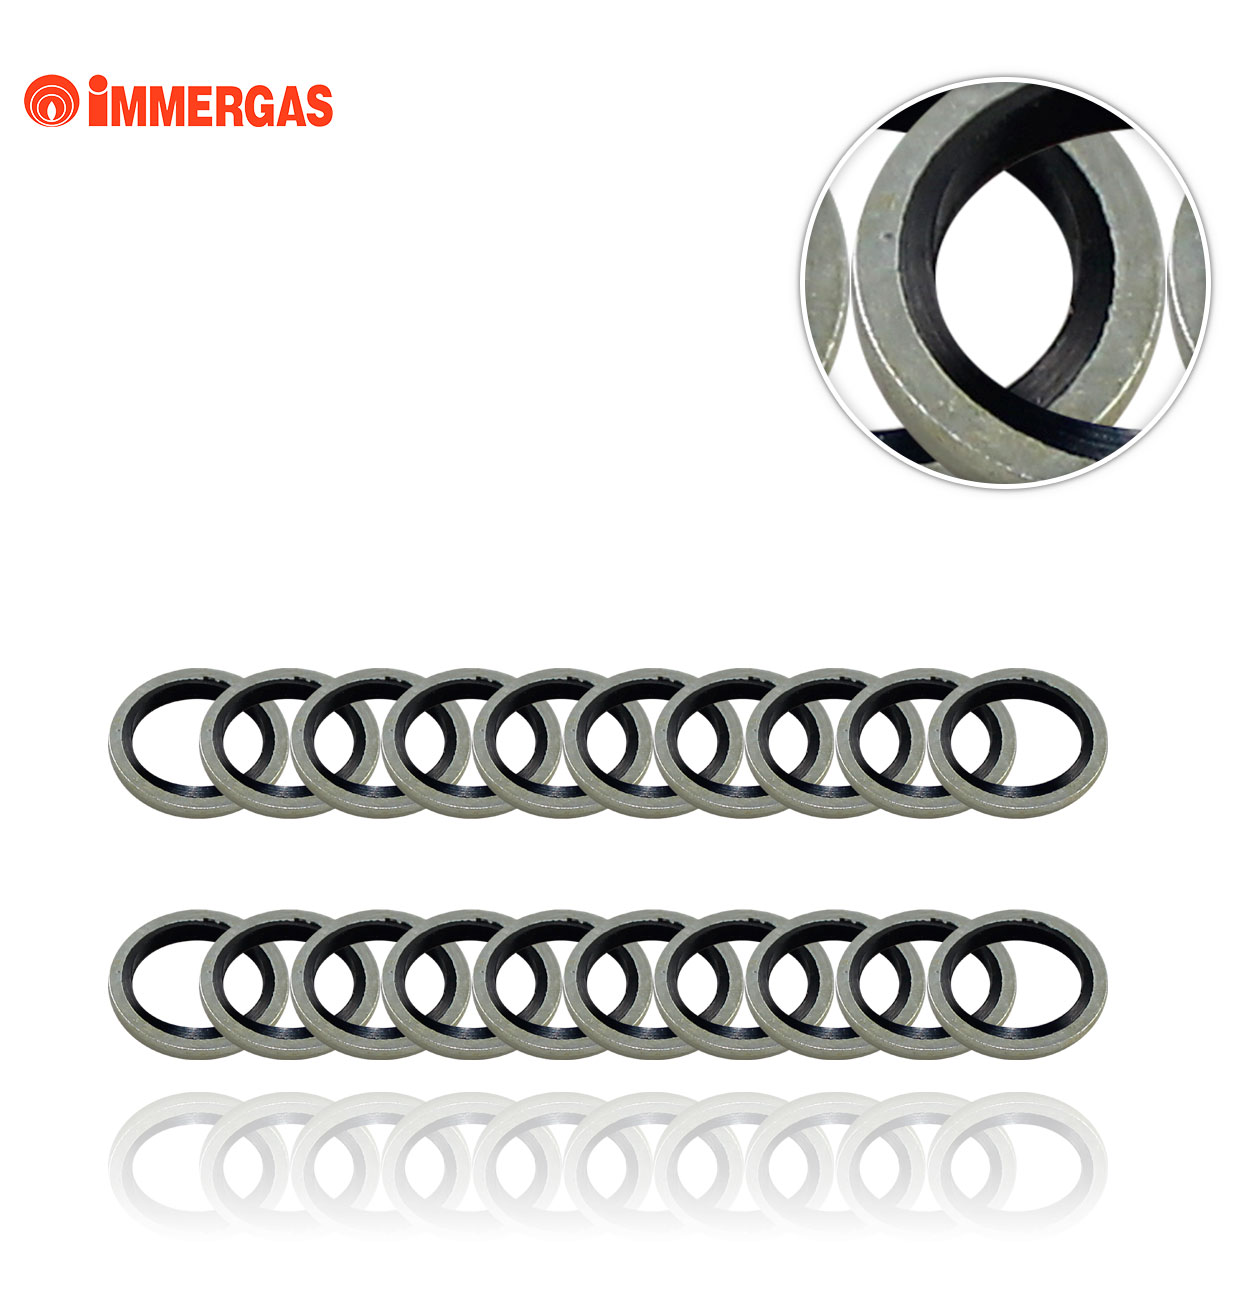 3016063 IMMERGAS SELF-CENTRING JOINTS (20 pcs.)